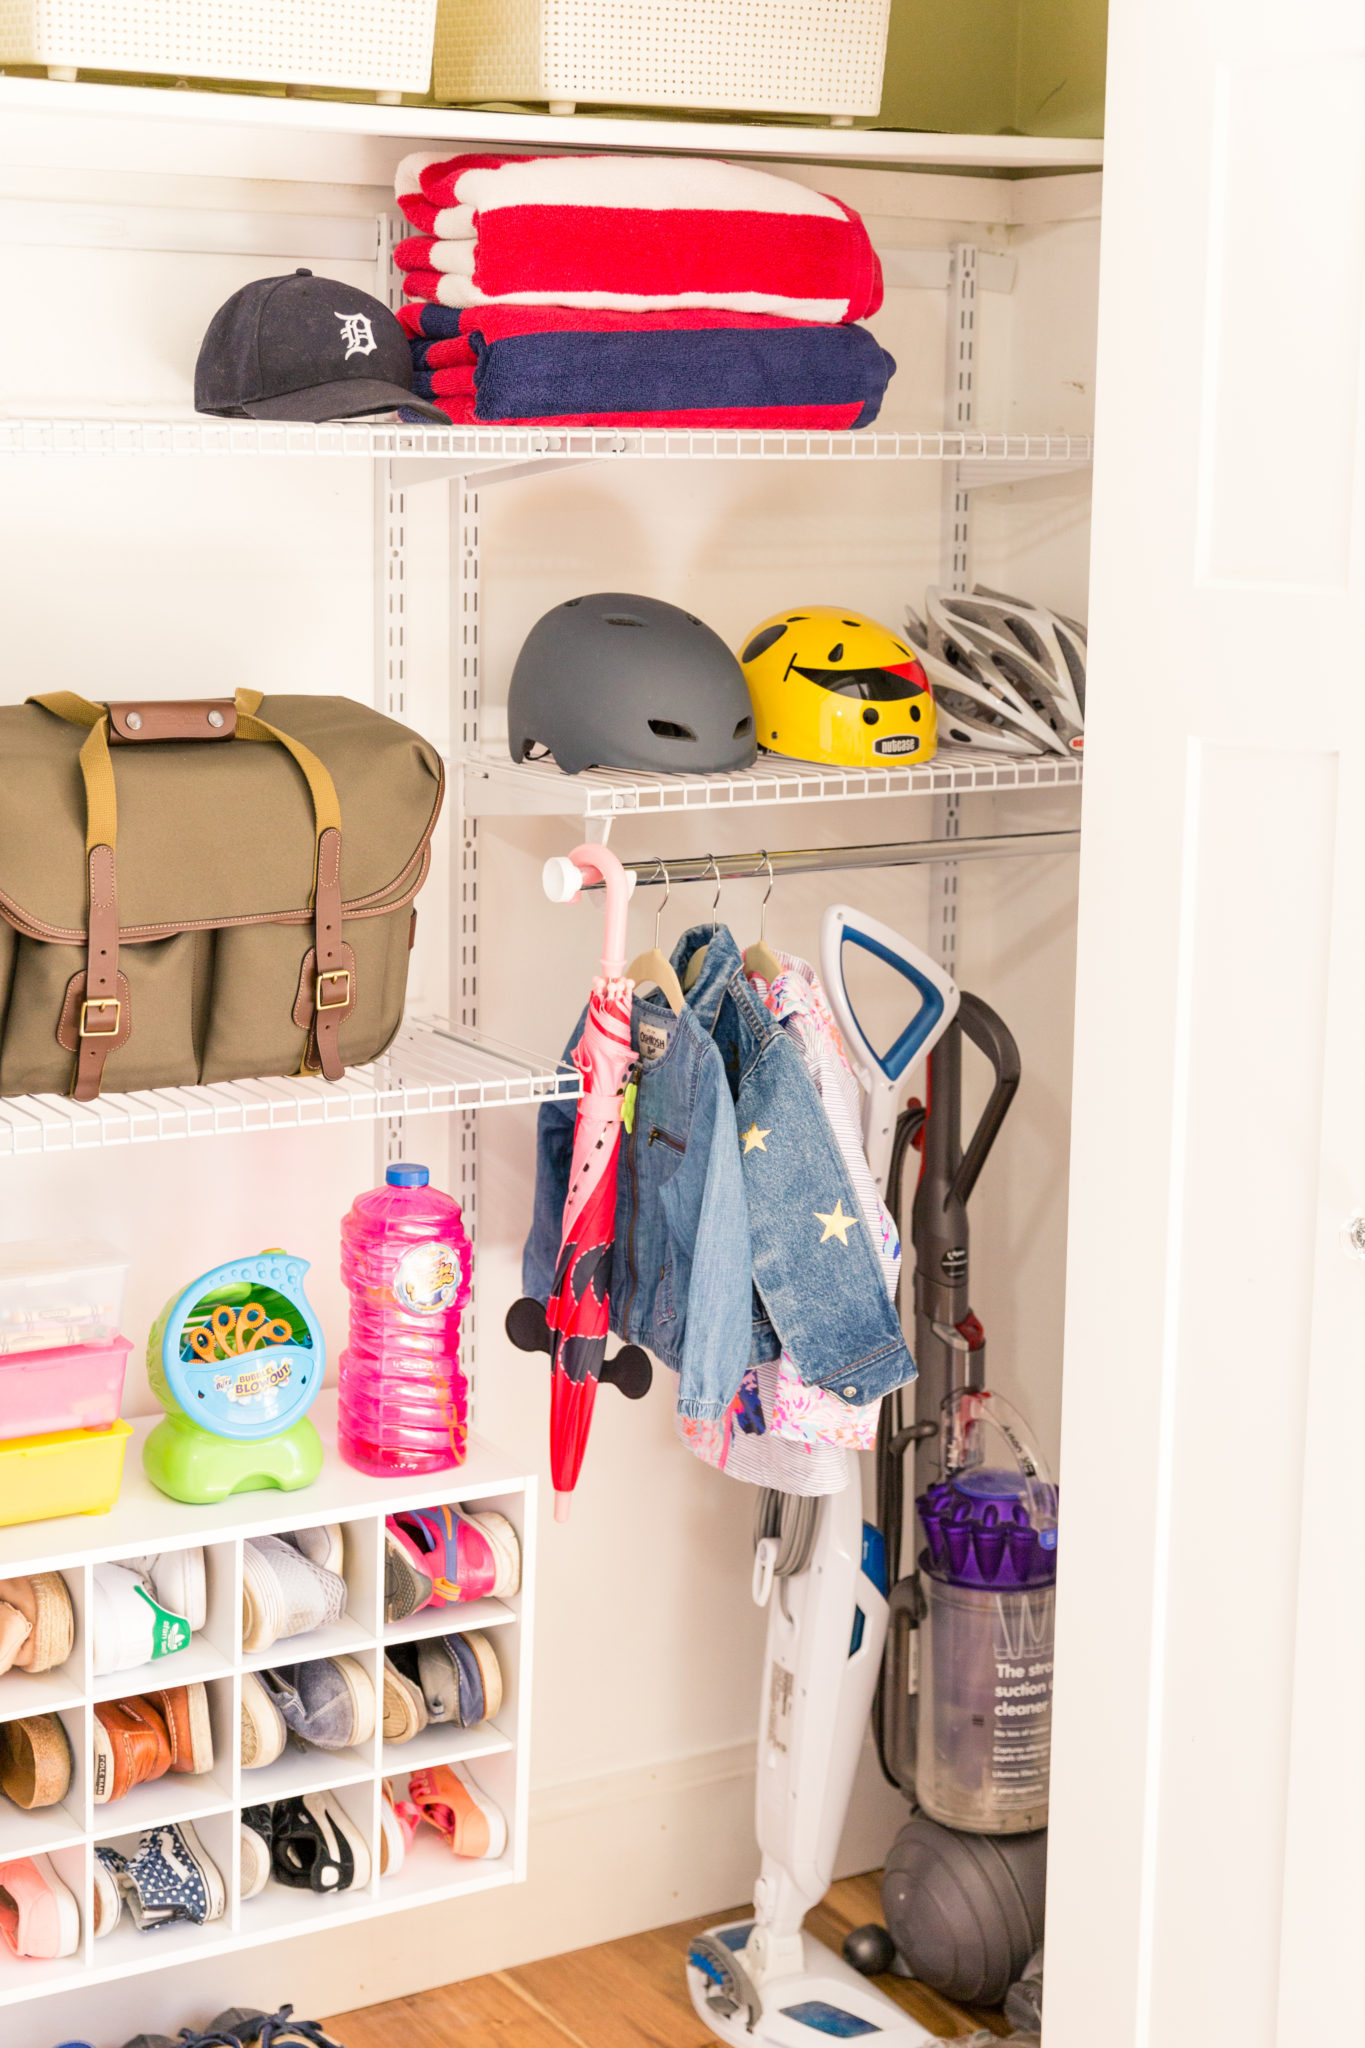 Rubbermaid ® HomeFree Series™ | How to organize your closet quickly and easily on allweareblog.com | low cost ways to organize your closet